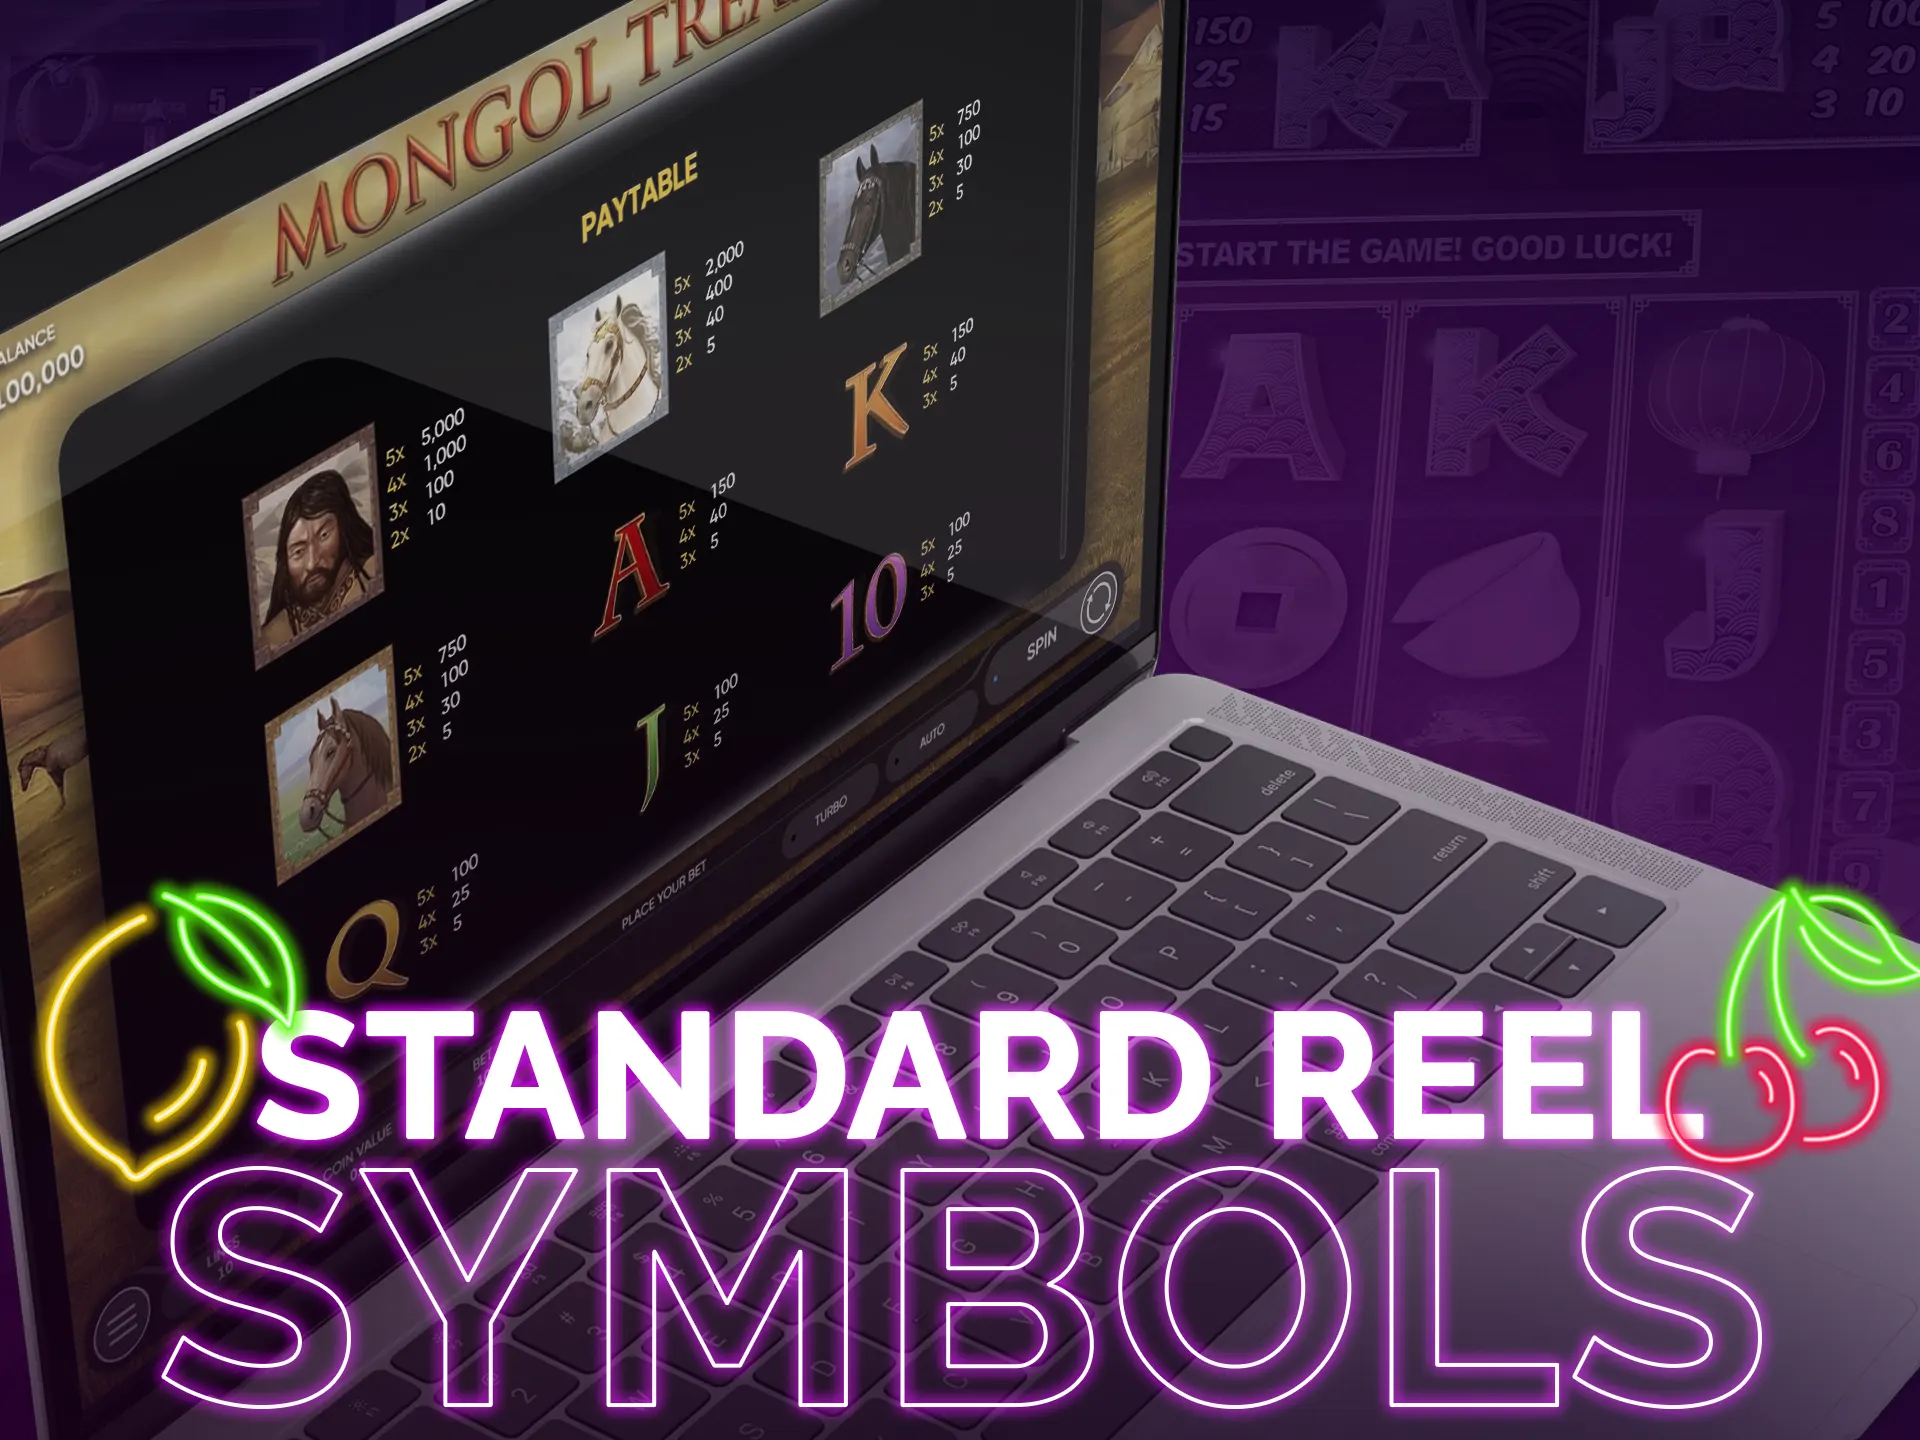 Standard reel symbols form paid combinations with varied payout ratios.